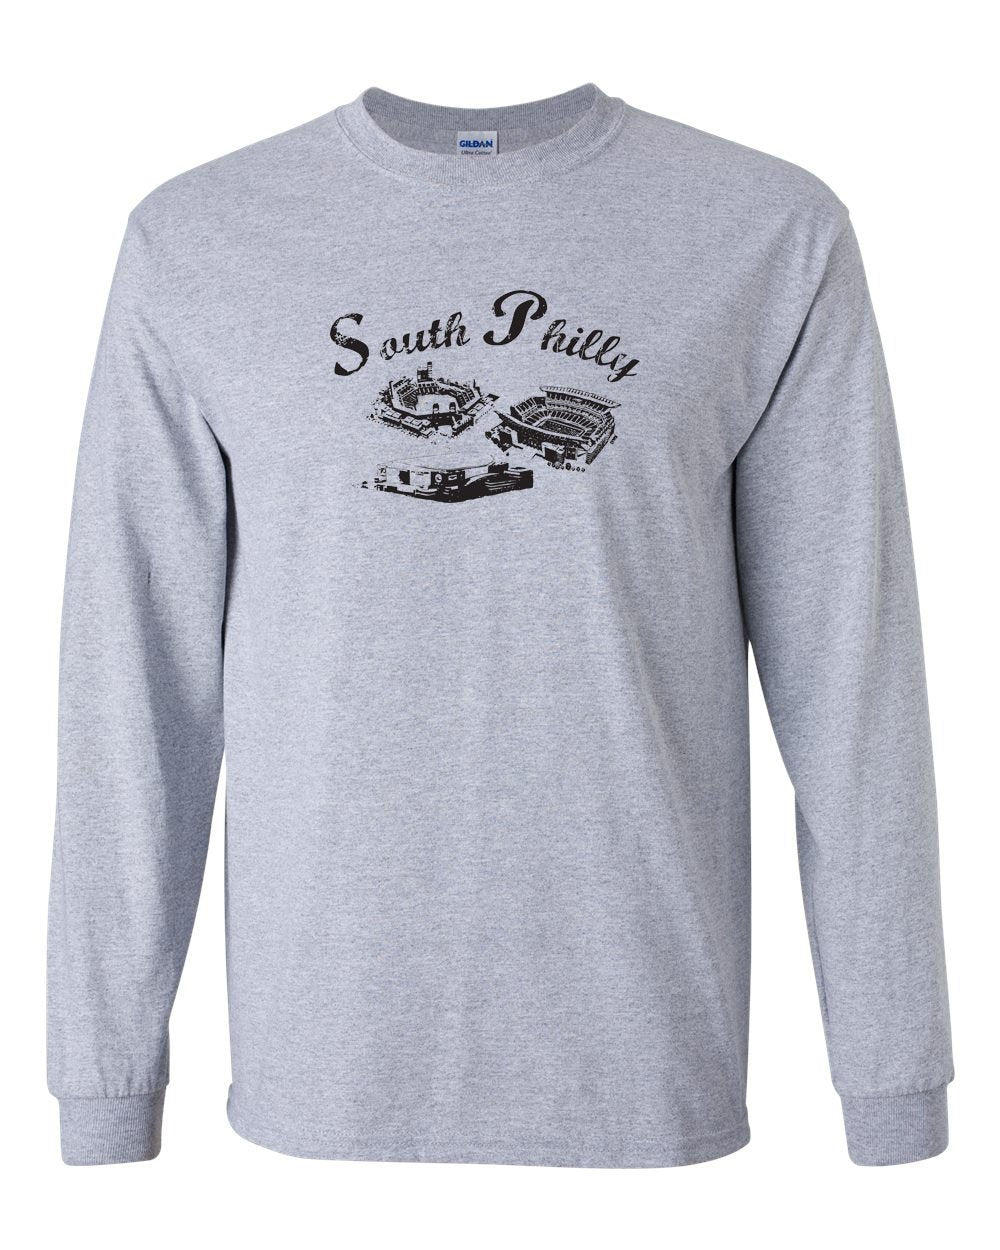 South Philly MENS Long Sleeve Heavy Cotton T-Shirt